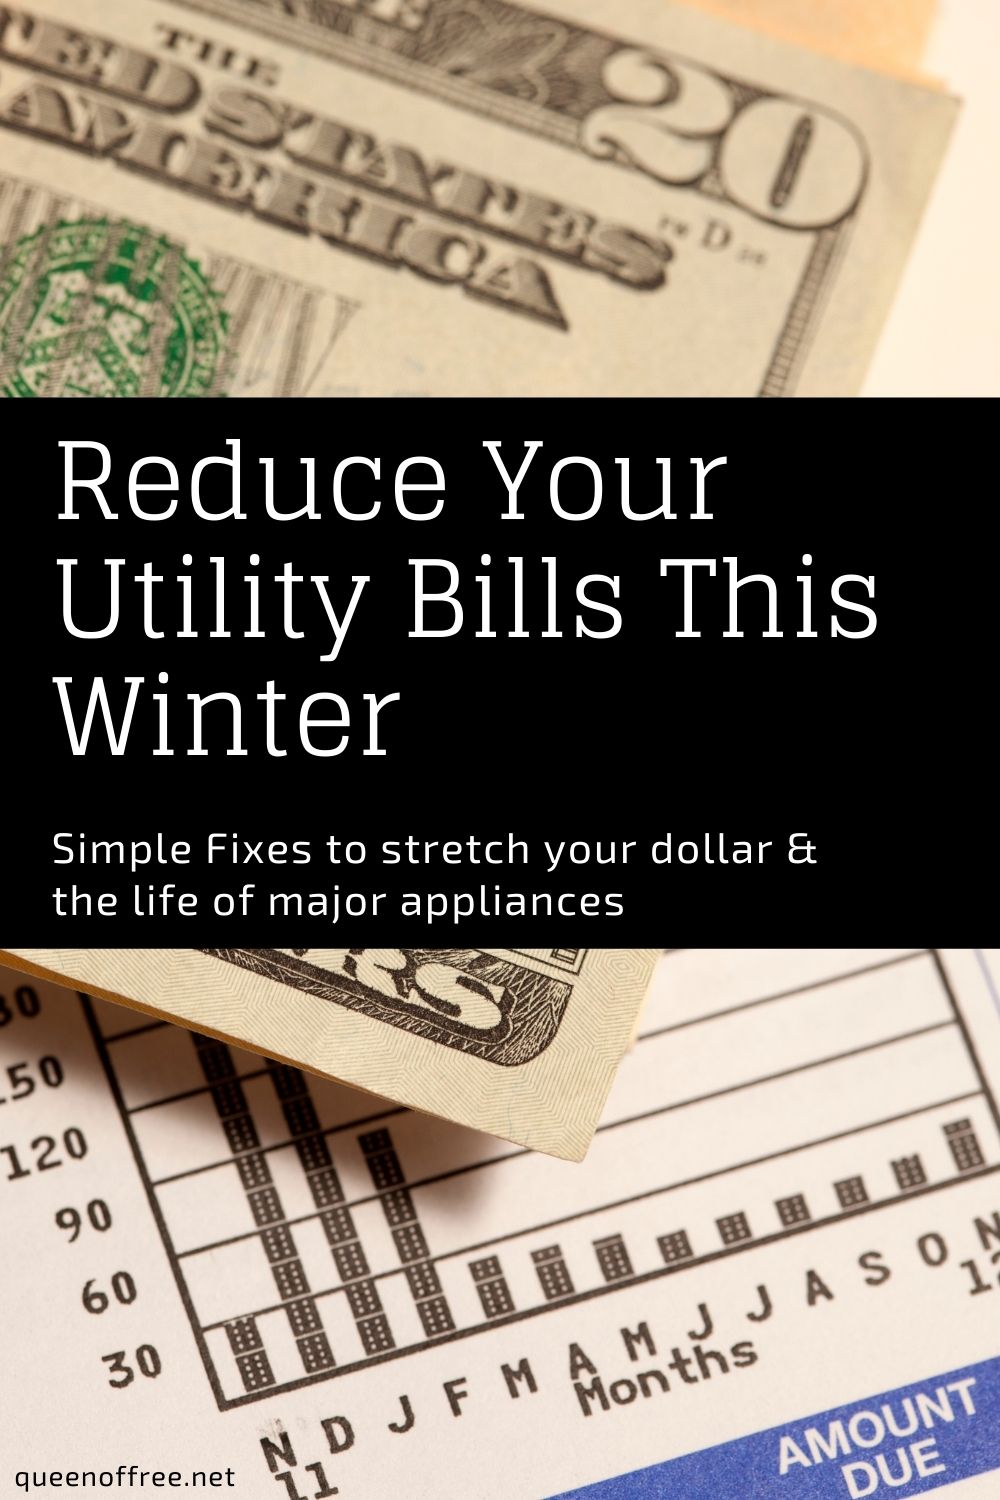 The quick and easy ideas will help you reduce home utility bills this winter while also extending the life of your major appliances!